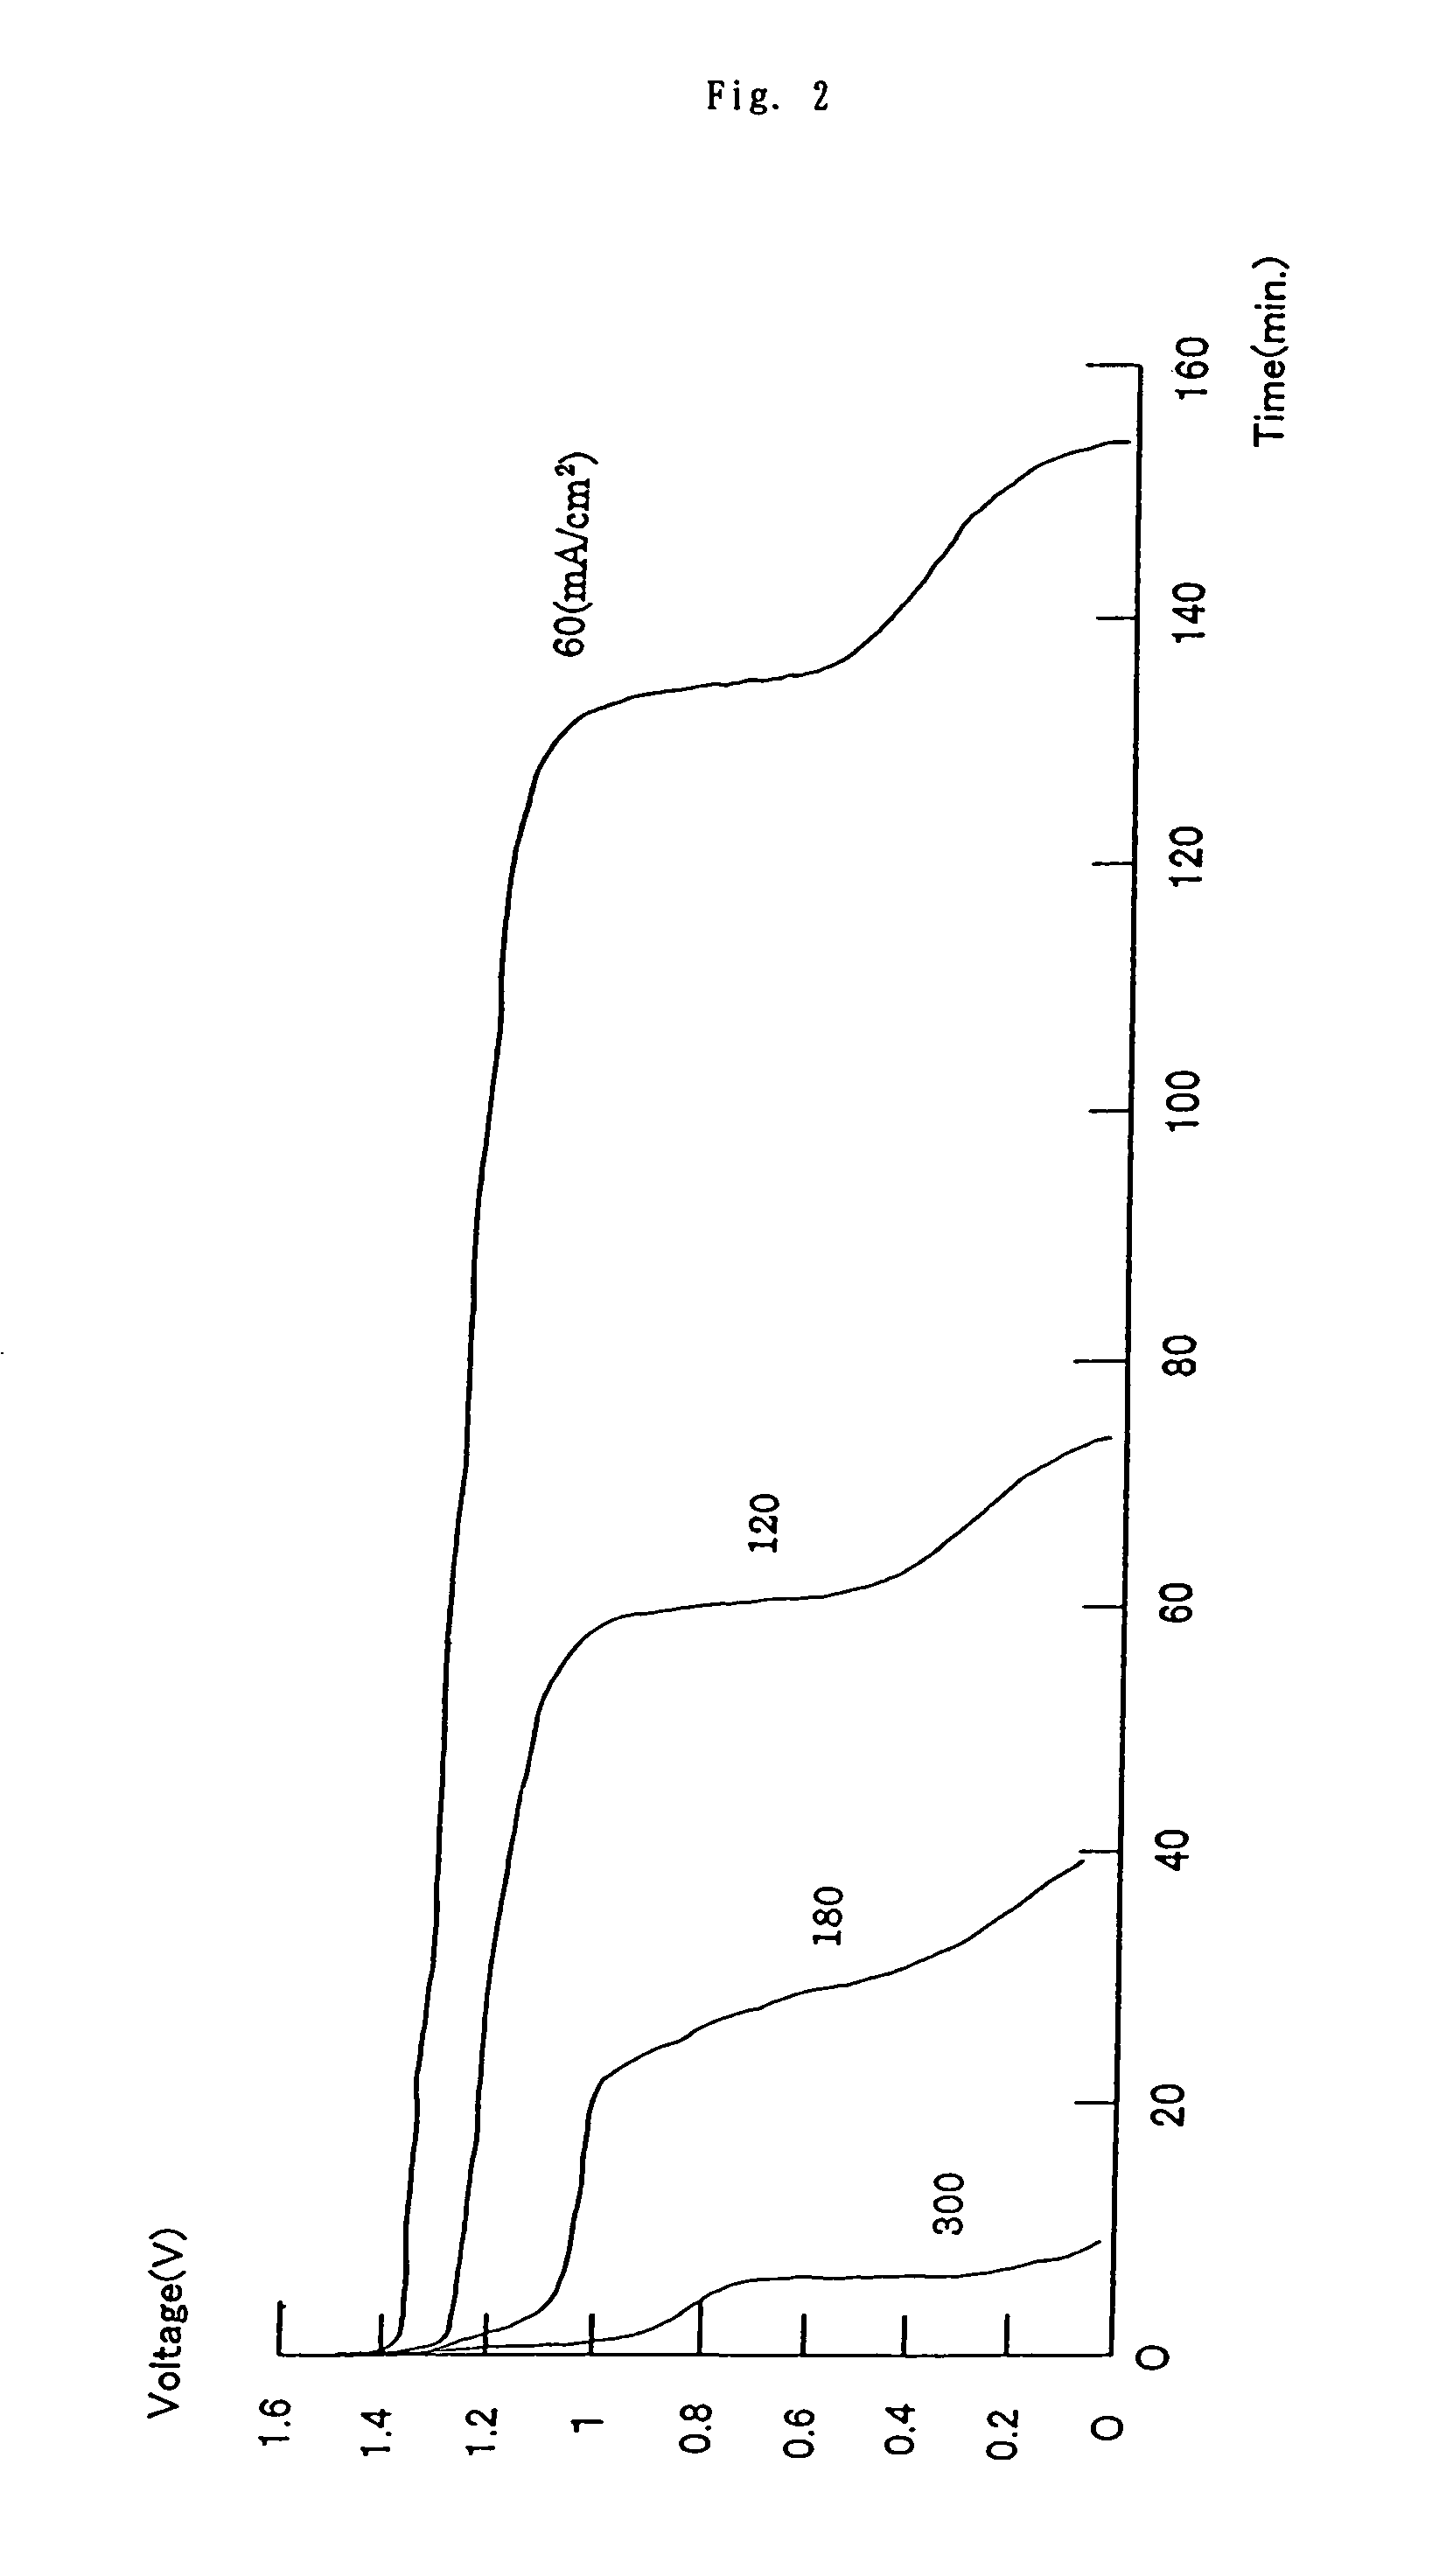 Method of operating a secondary battery system having first and second tanks for reserving electrolytes